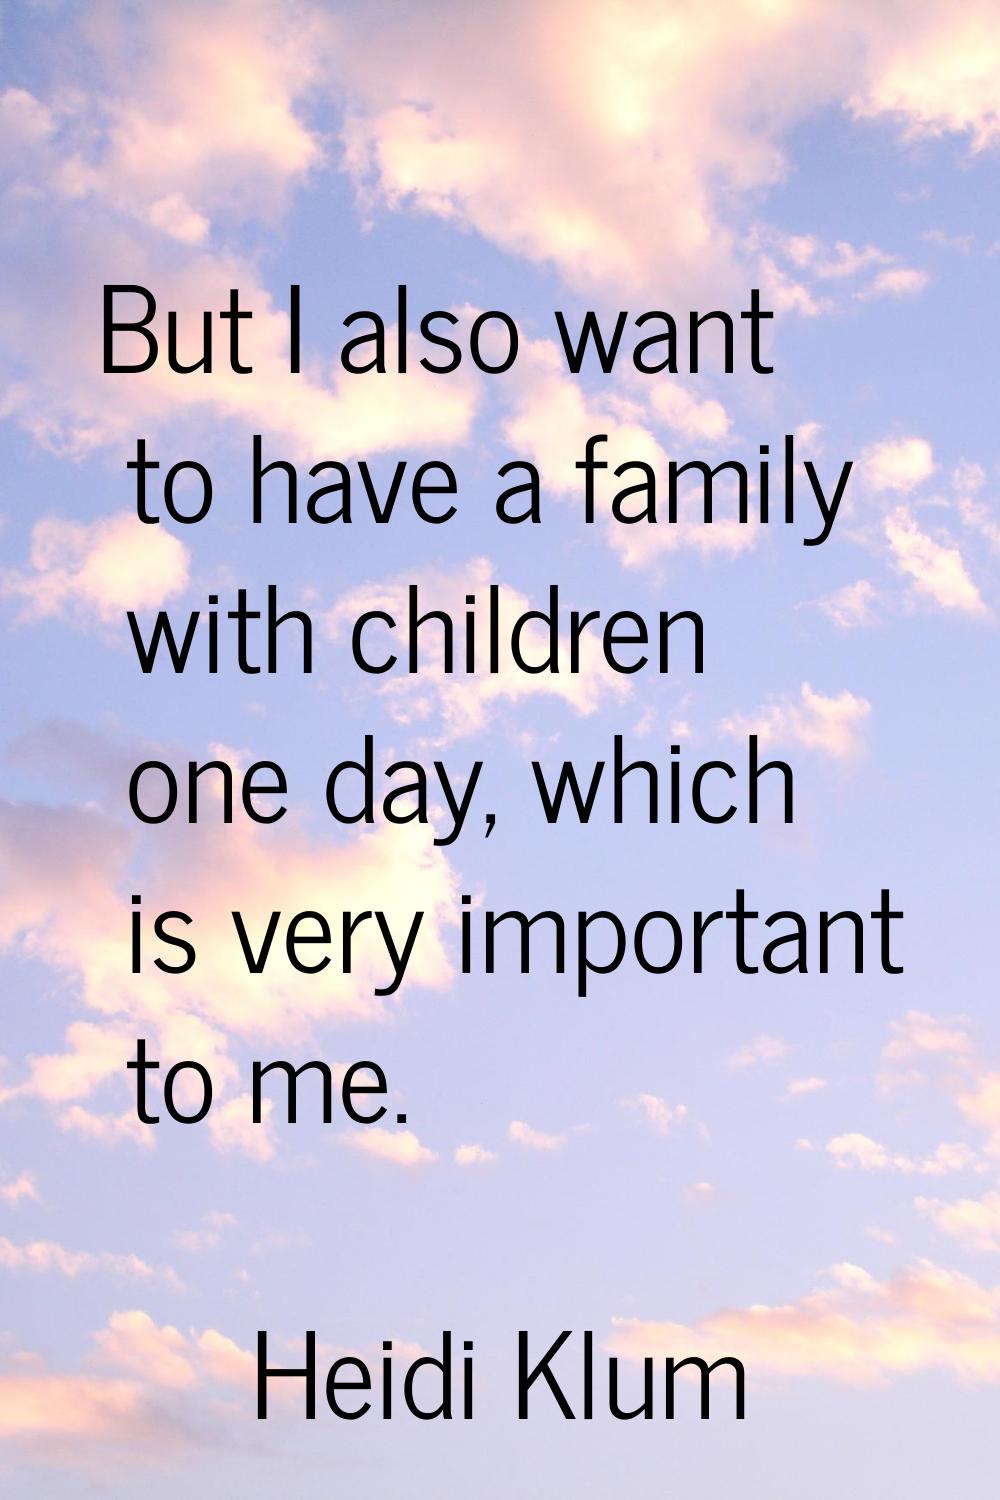 But I also want to have a family with children one day, which is very important to me.